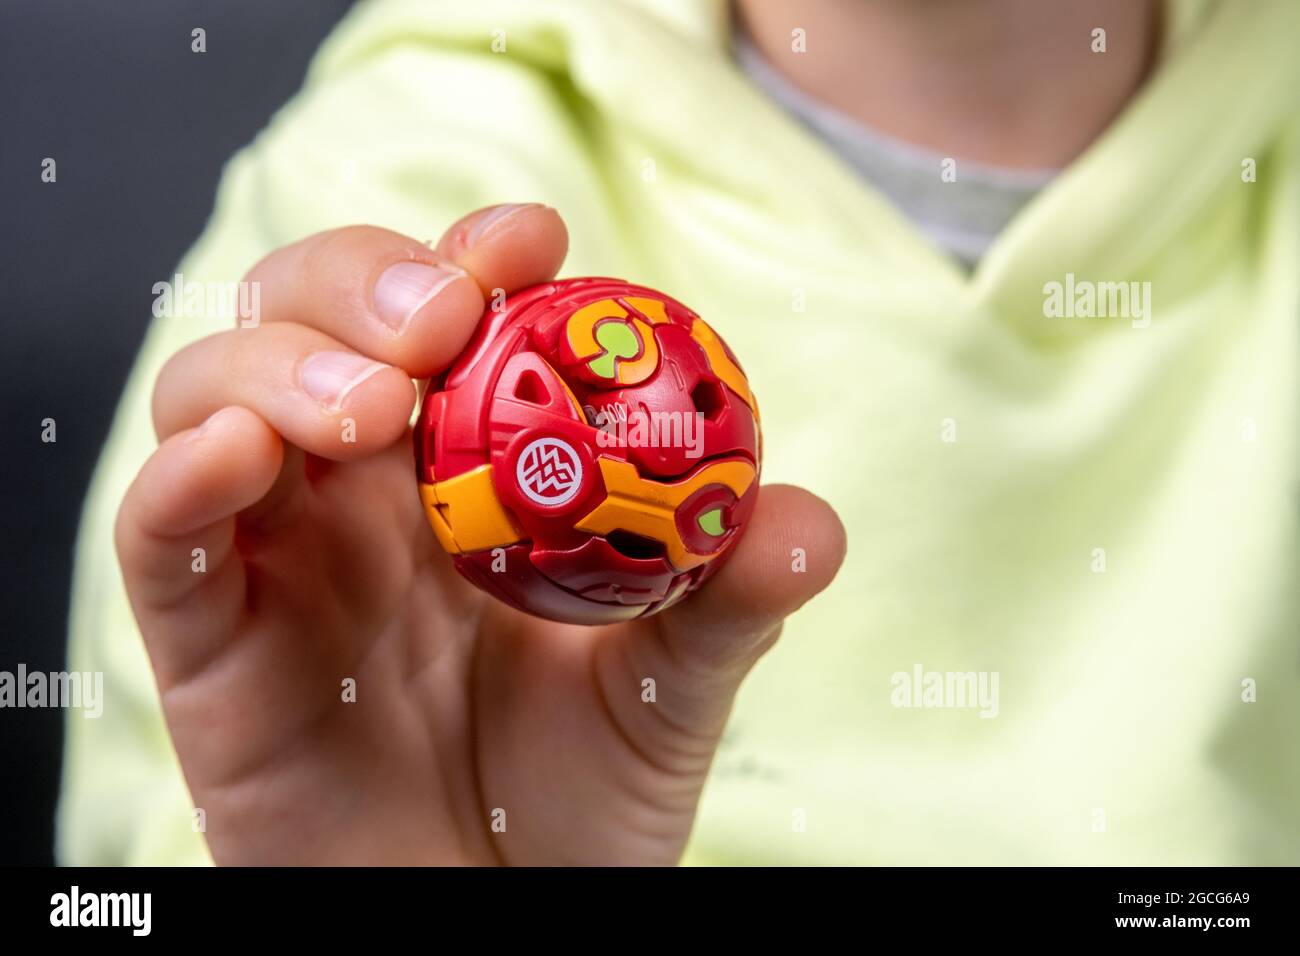 Bakugan Ball toy. New popular transformer toy assembled in ball shape, hold in child's hand. Stafford, United Kingdom, August 8, 2021 Stock Photo